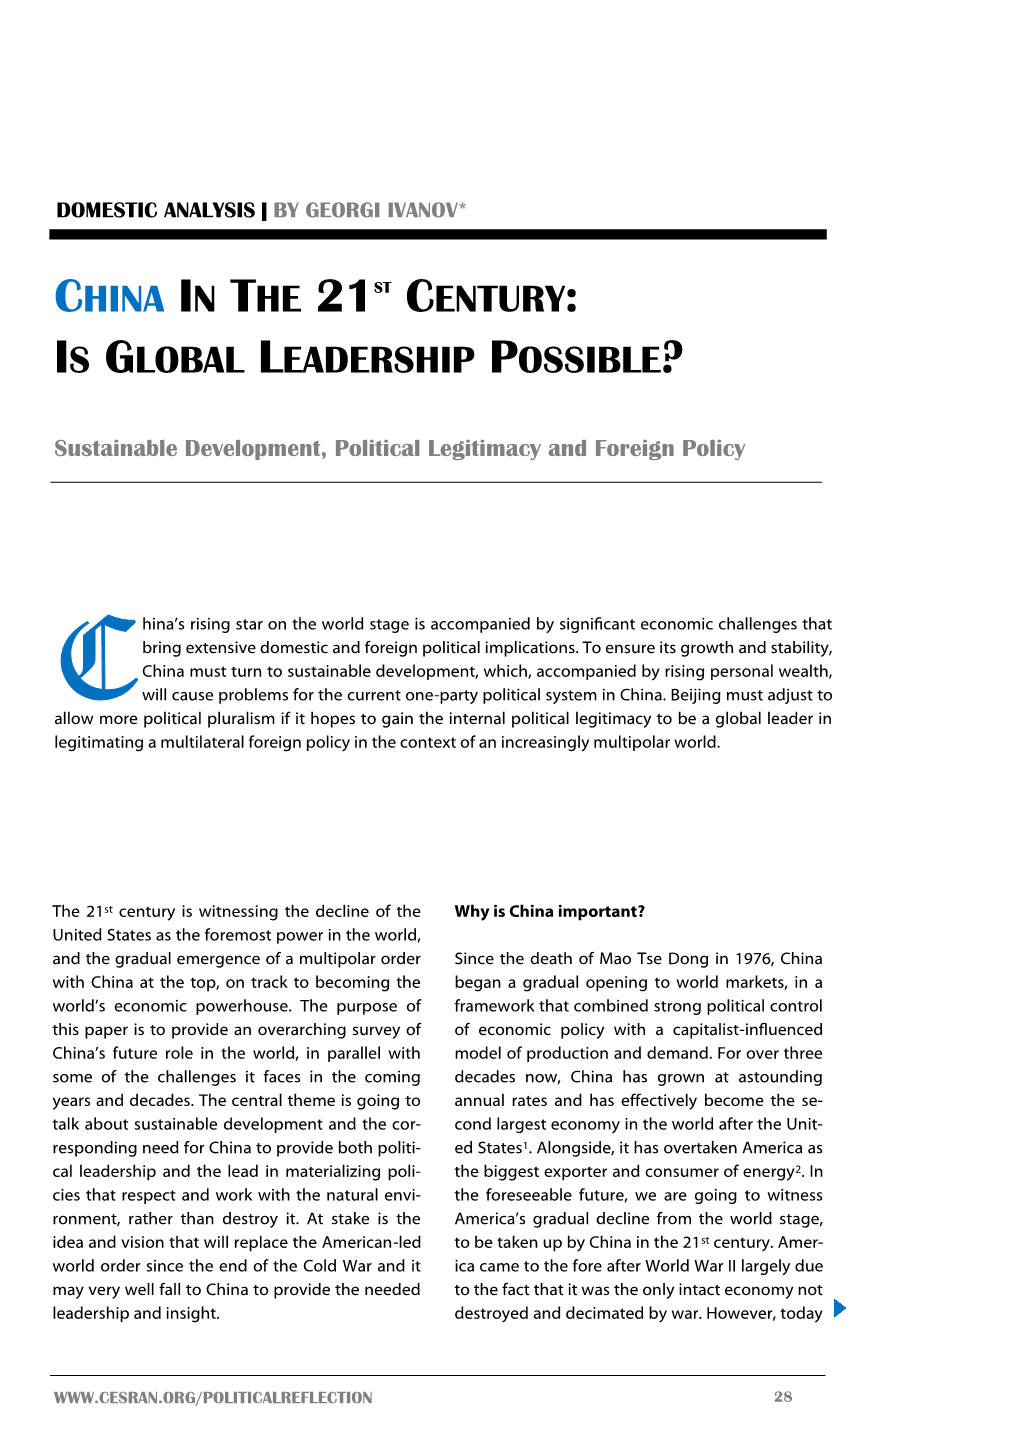 China in the 21St Century: Is Global Leadership Possible?